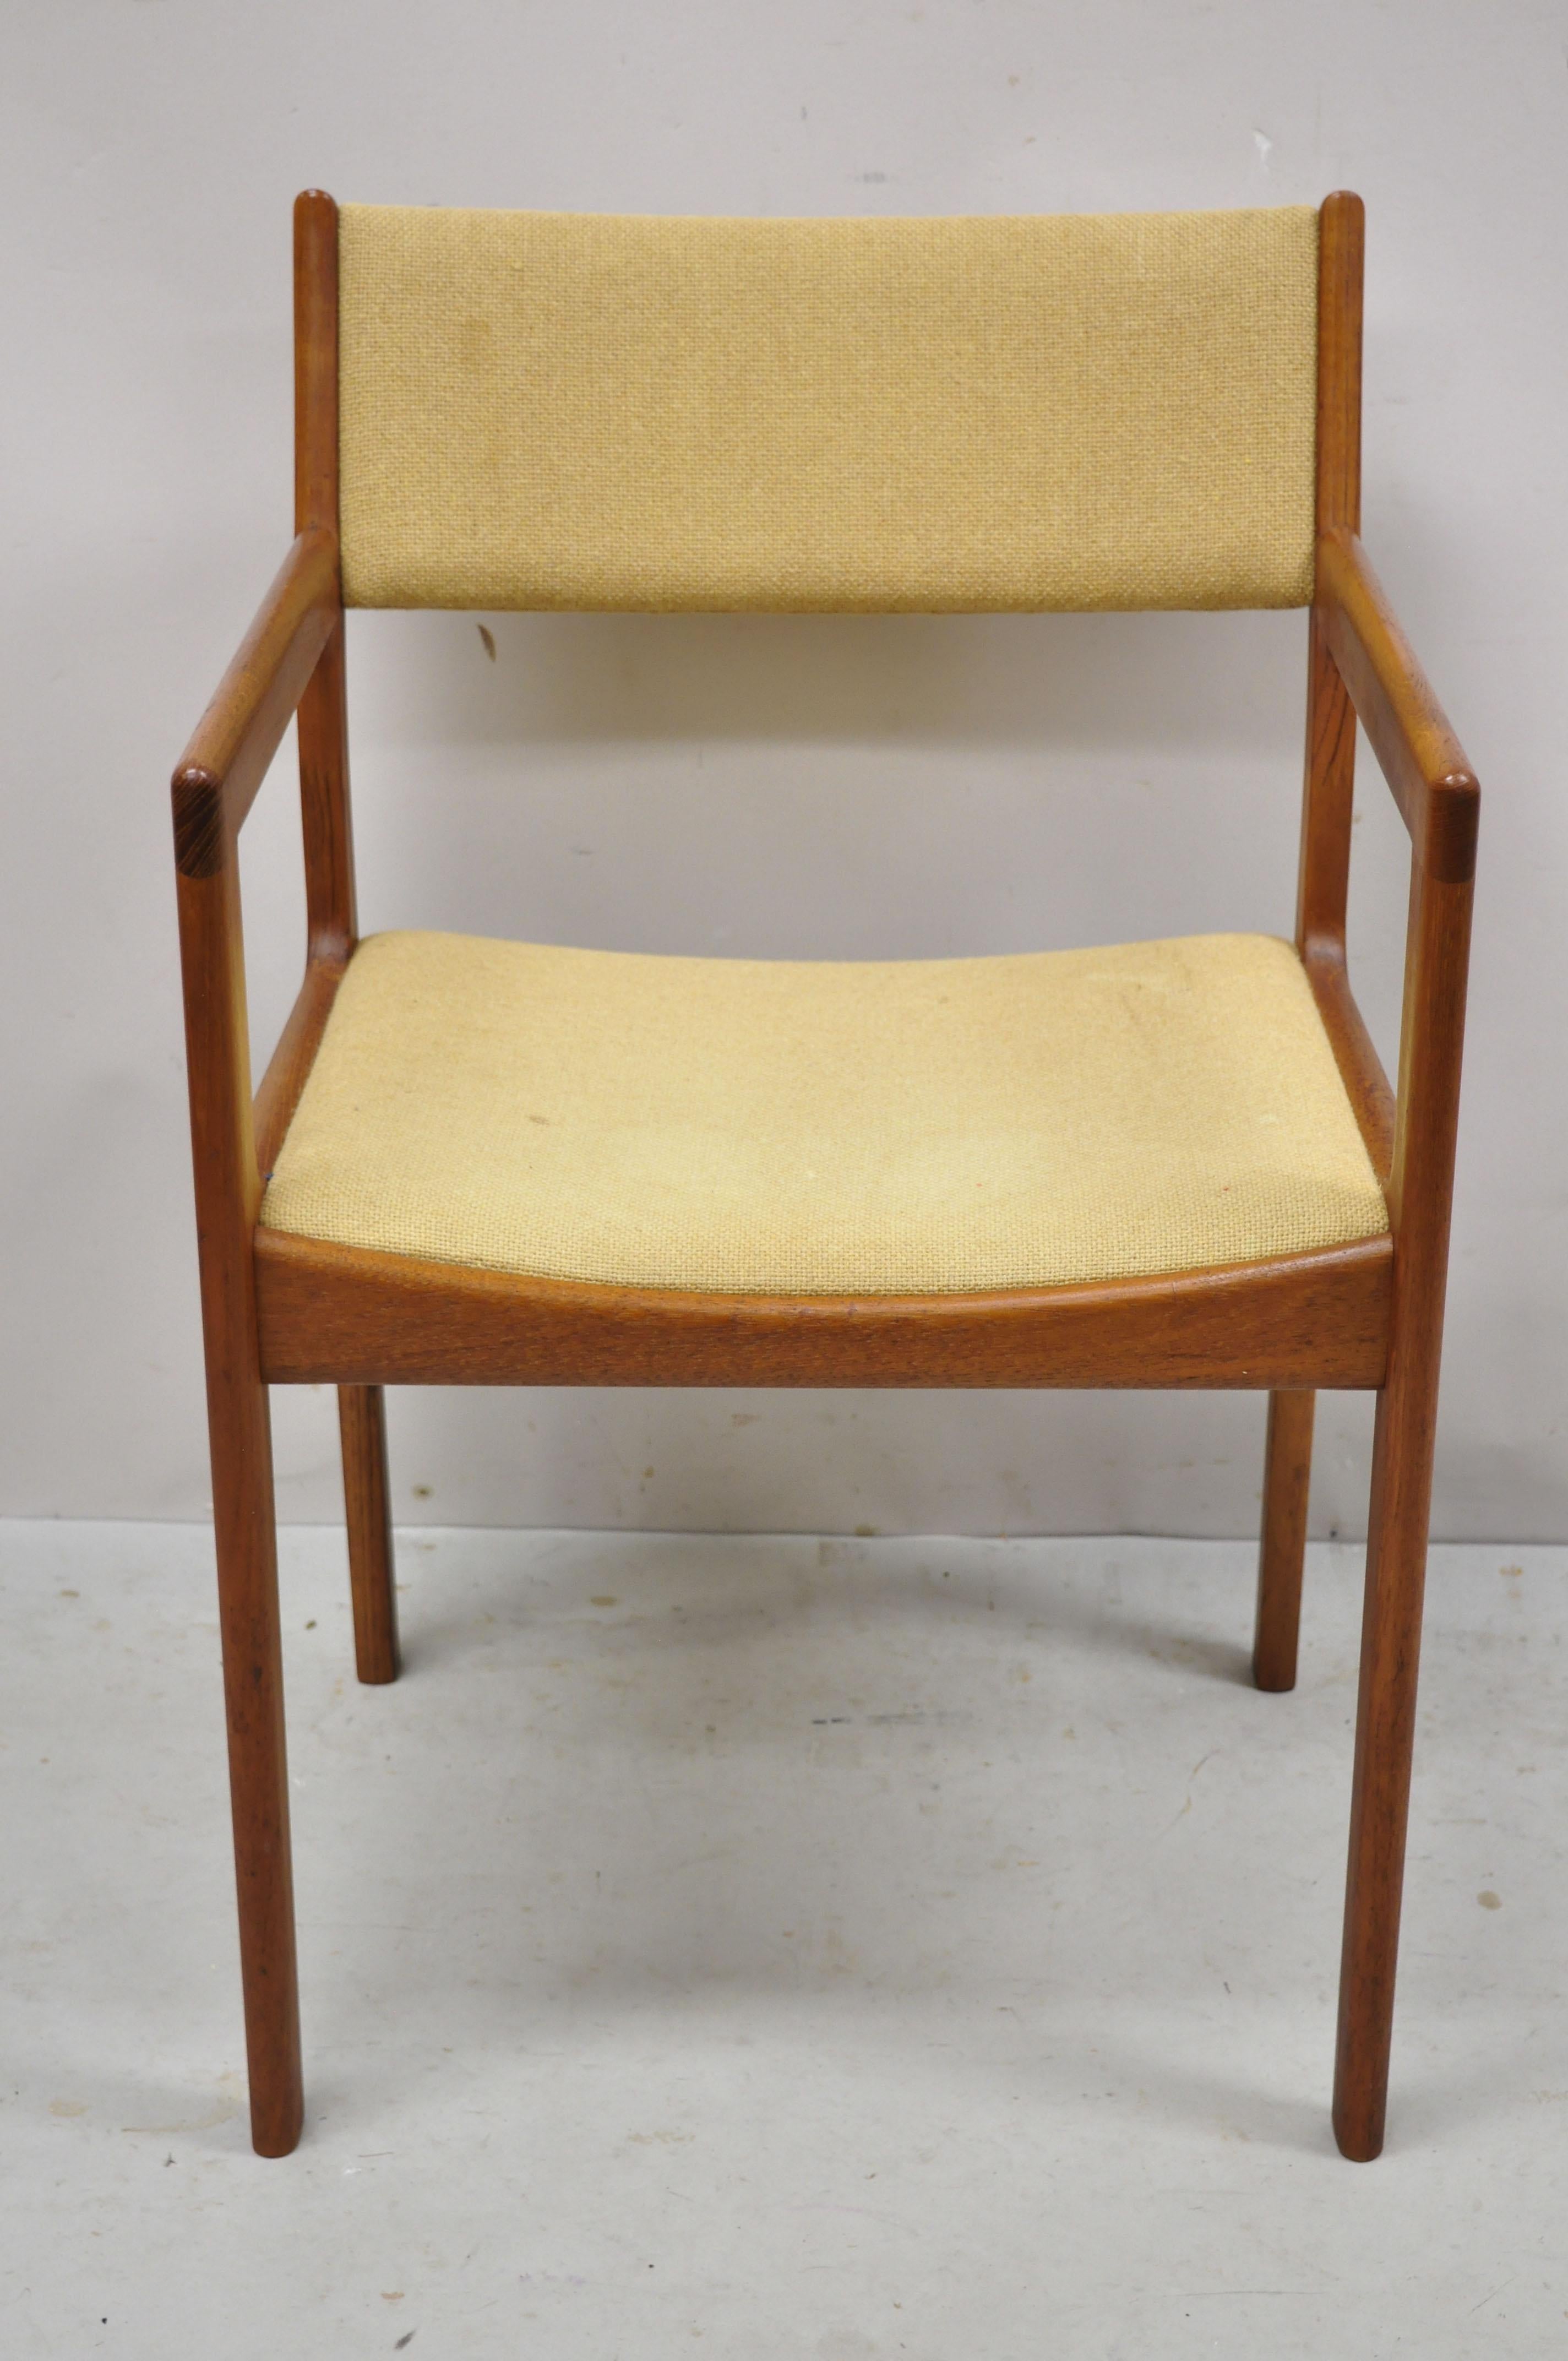 Vintage D-Scan Mid-Century Modern Danish style teak wood dining arm chair. Item features solid wood construction, beautiful wood grain, original label, clean modernist lines, quality craftsmanship, great style and form. Circa Mid to Late 20th